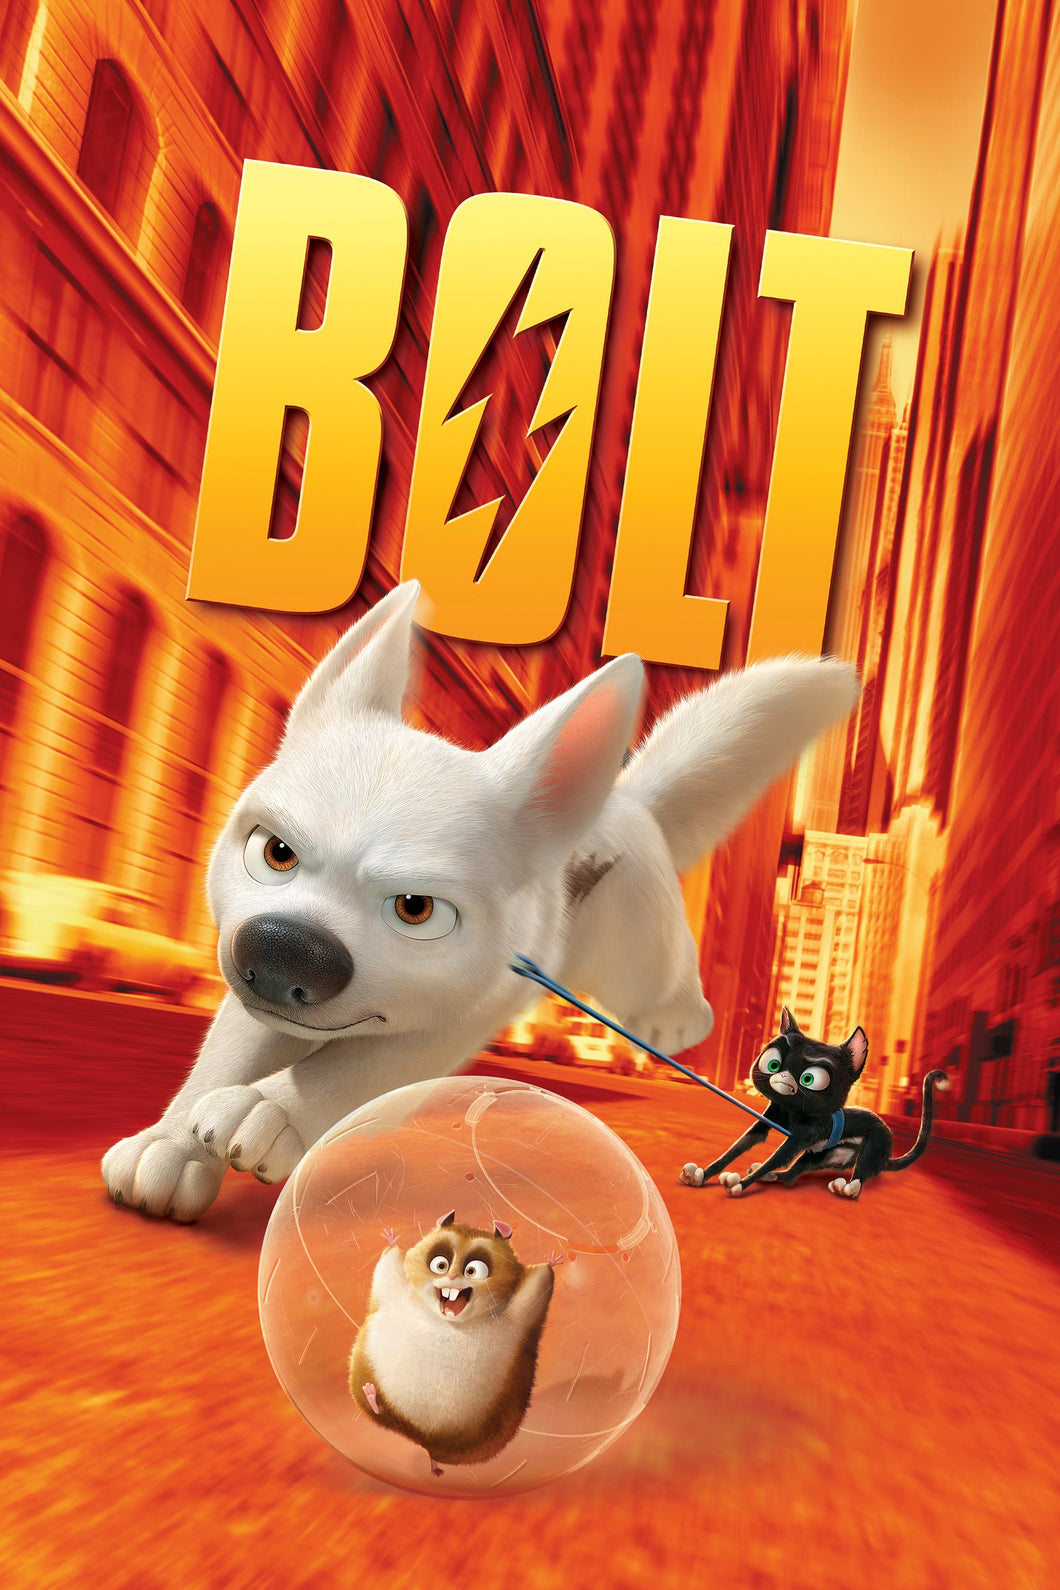 Bolt (2008) Animated Movie Poster Framed or Unframed Glossy Poster Free UK Shipping!!!